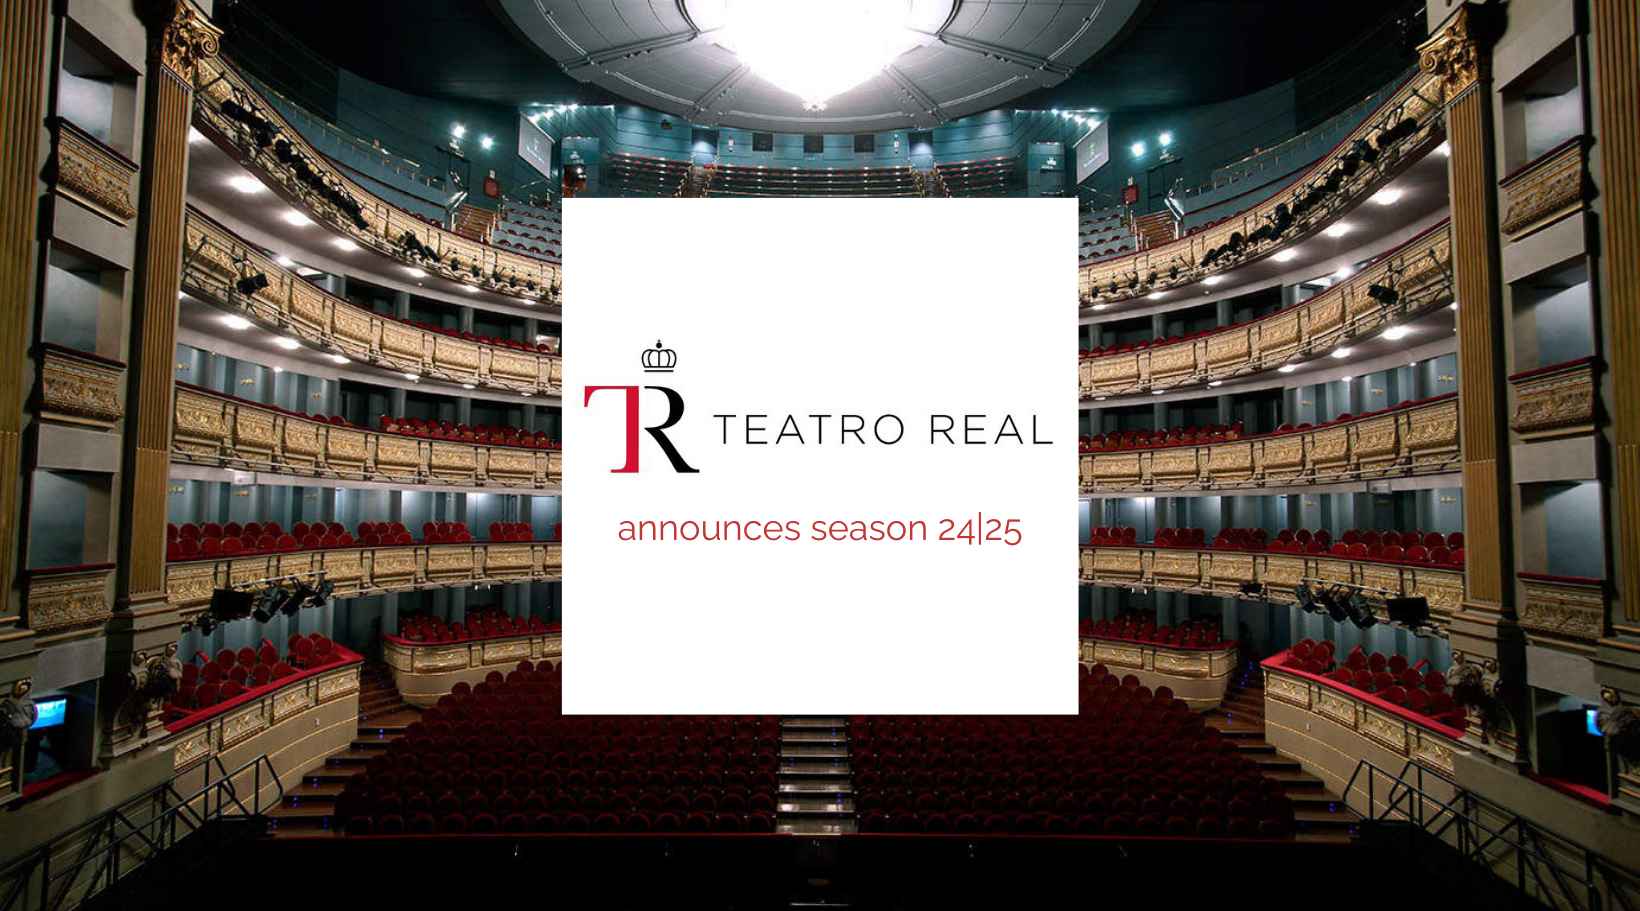 The new Season at Teatro Real is announced 